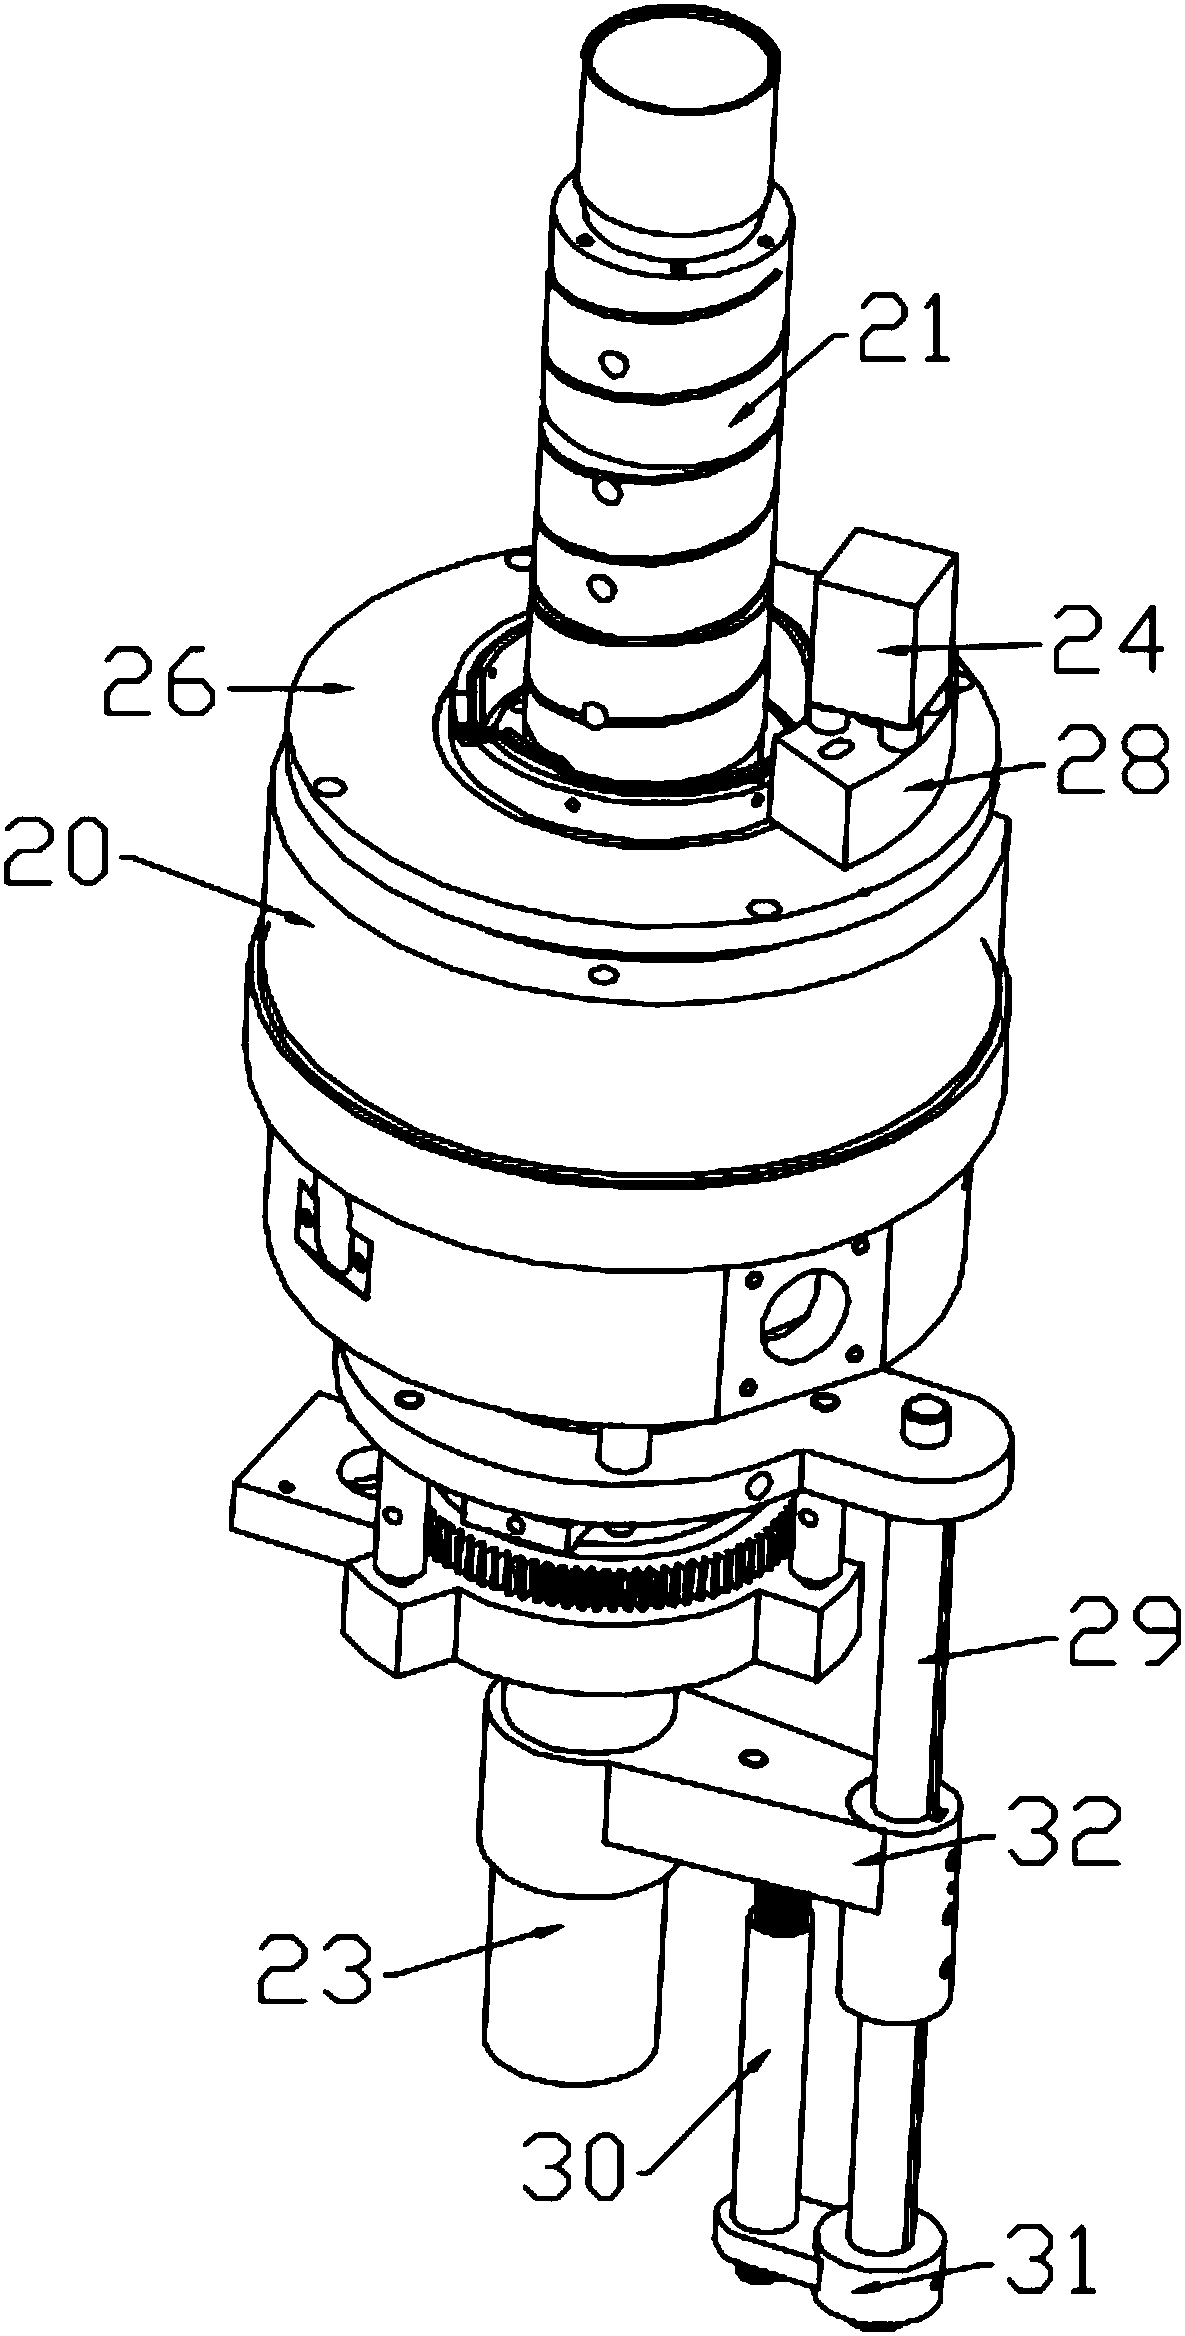 Hosiery body locating and ejecting device with movable sinker cover for integrated hosiery knitting machine